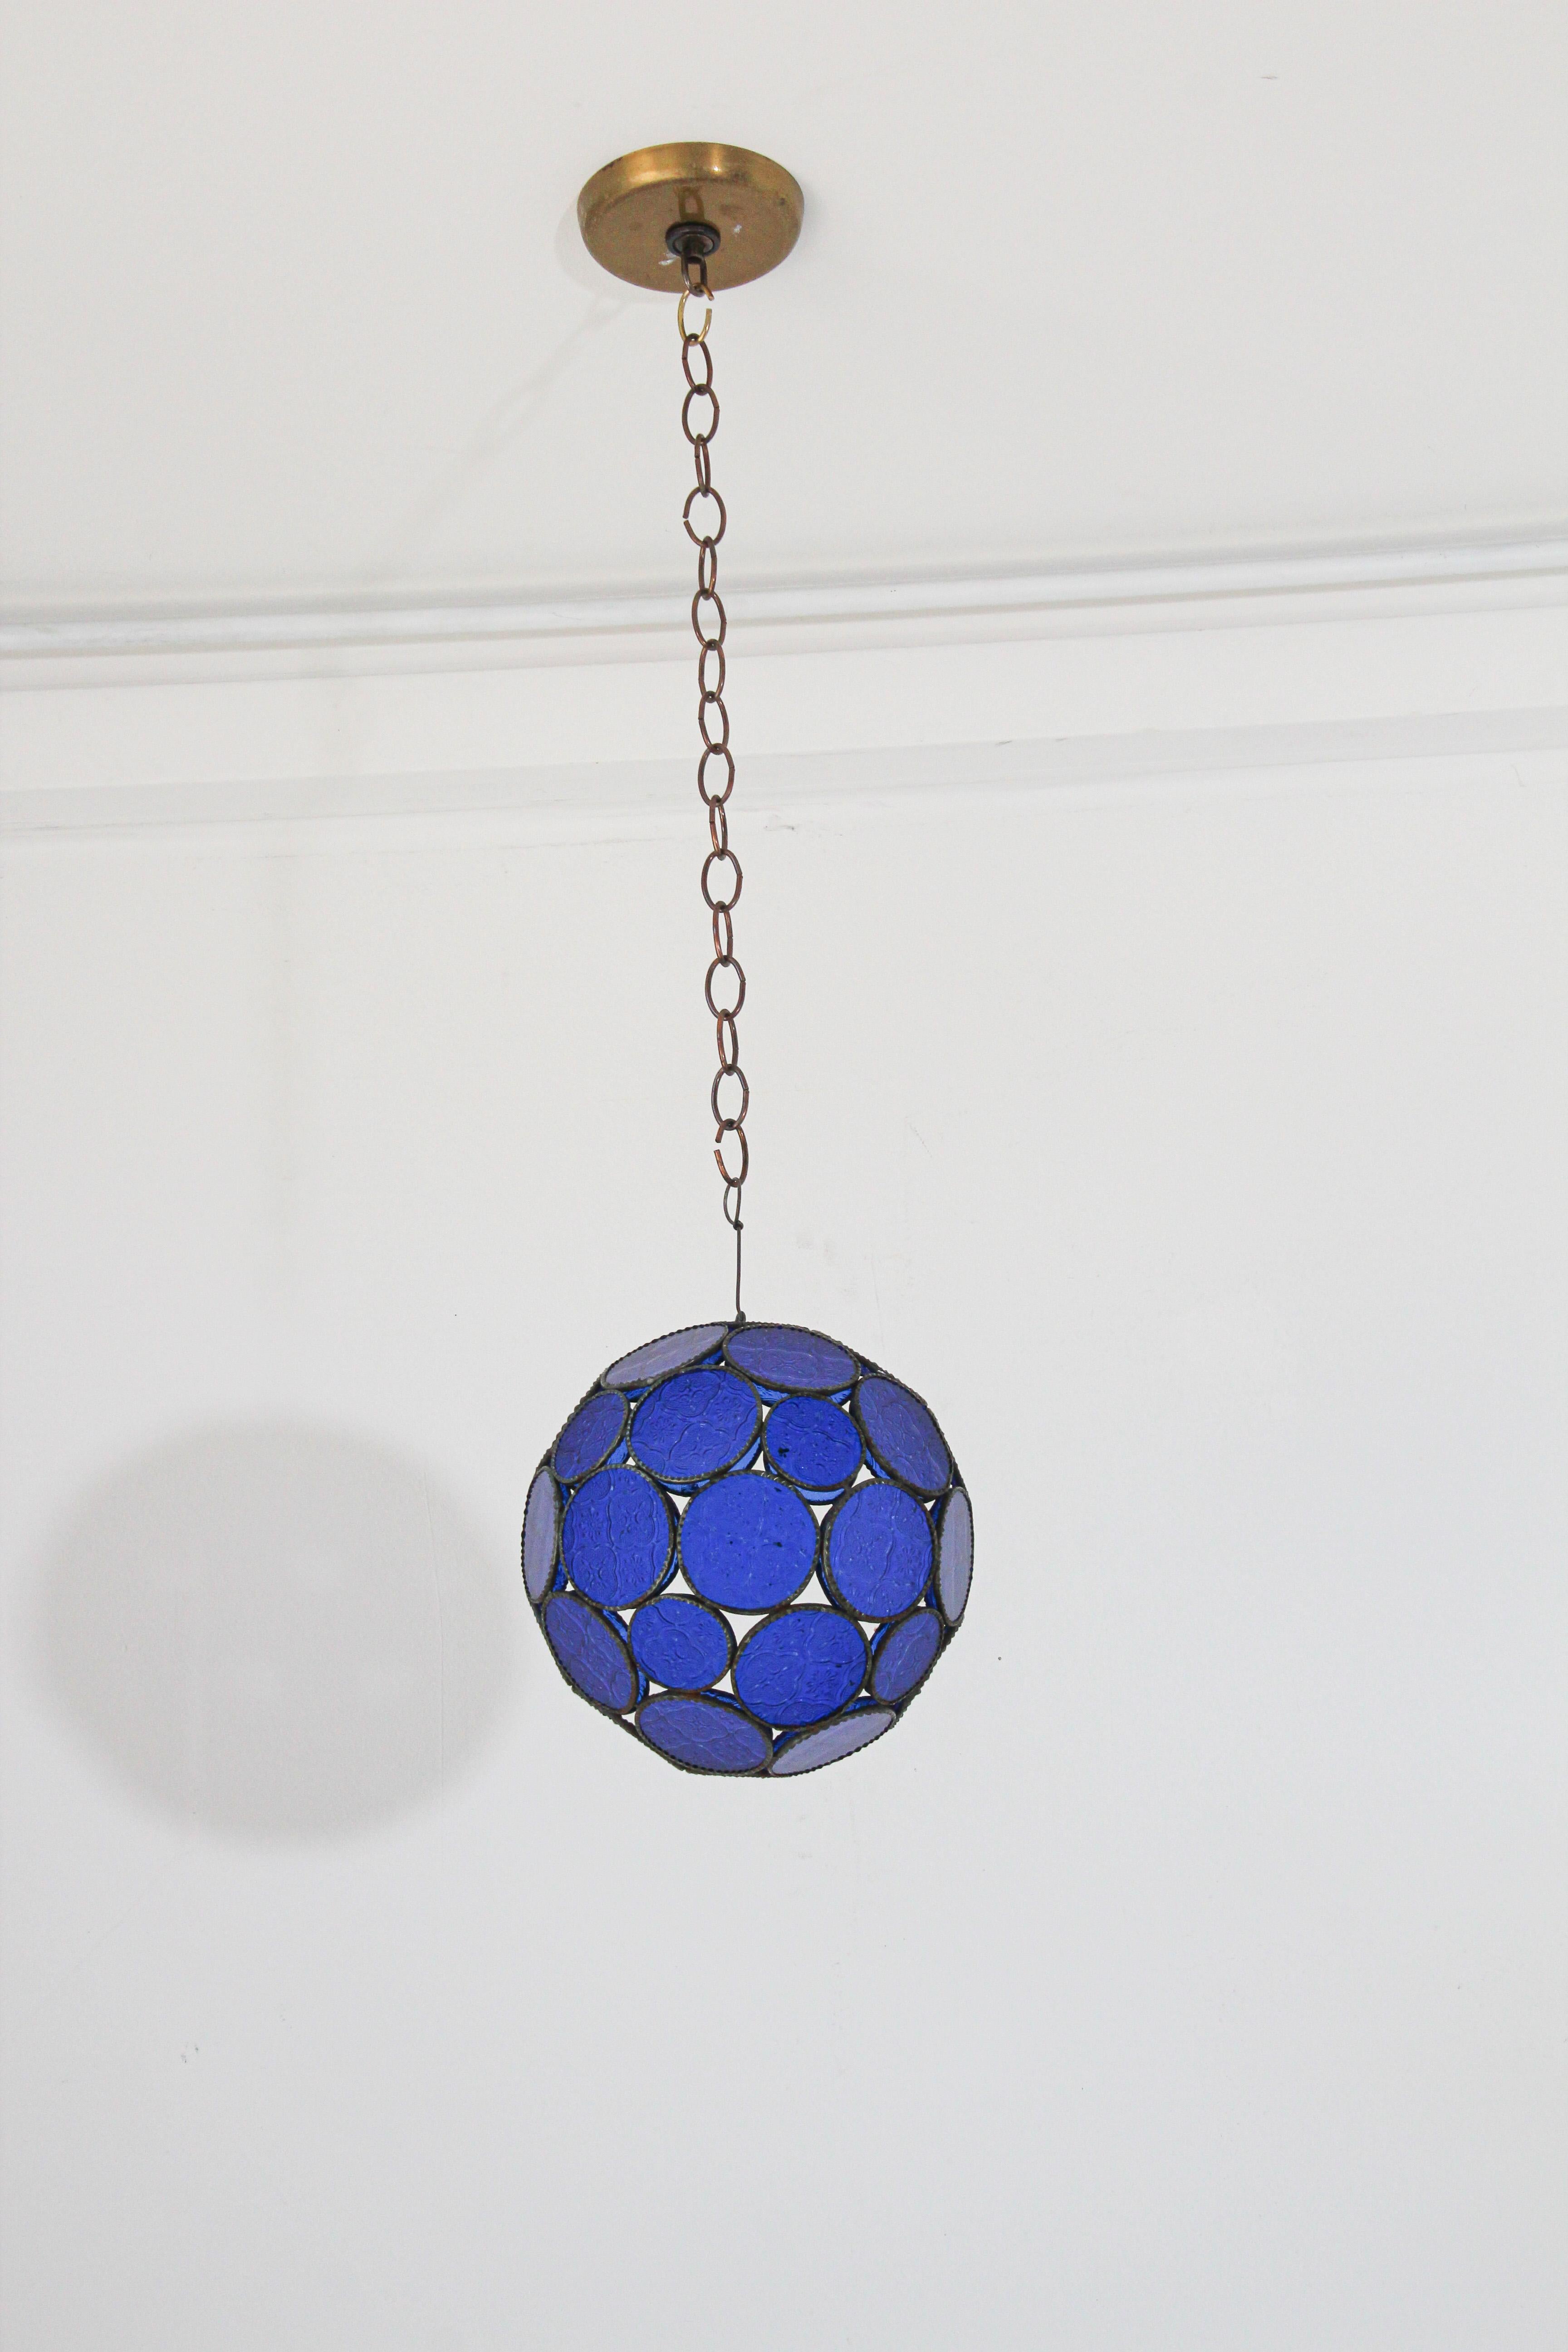 Handcrafted Moroccan Moorish Glass Orb Lantern with Blue Glass For Sale 2